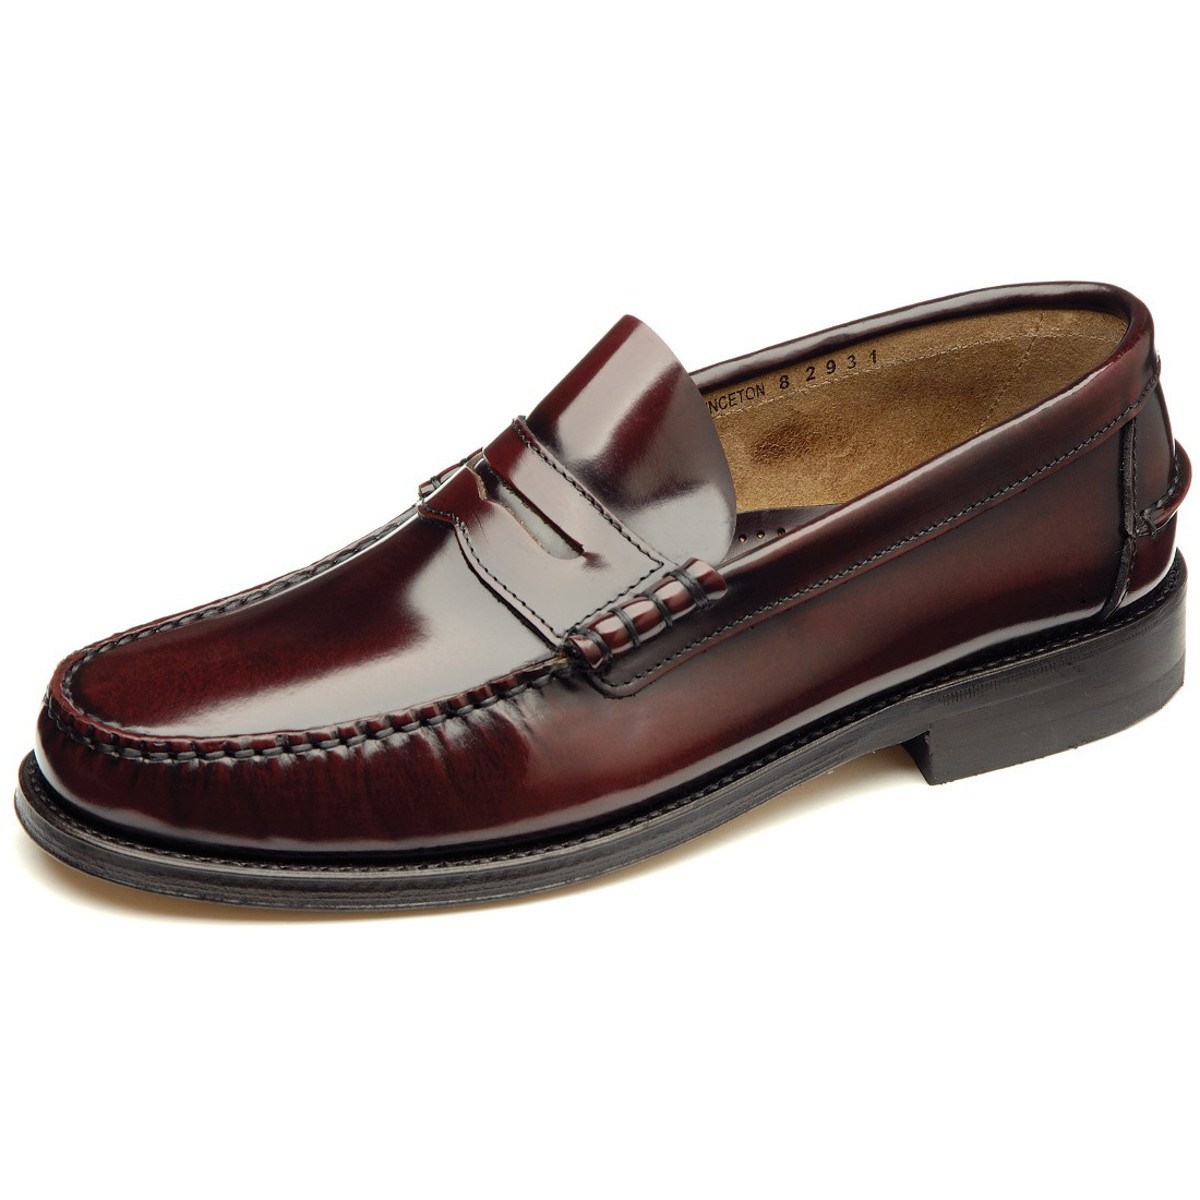 loake loafers